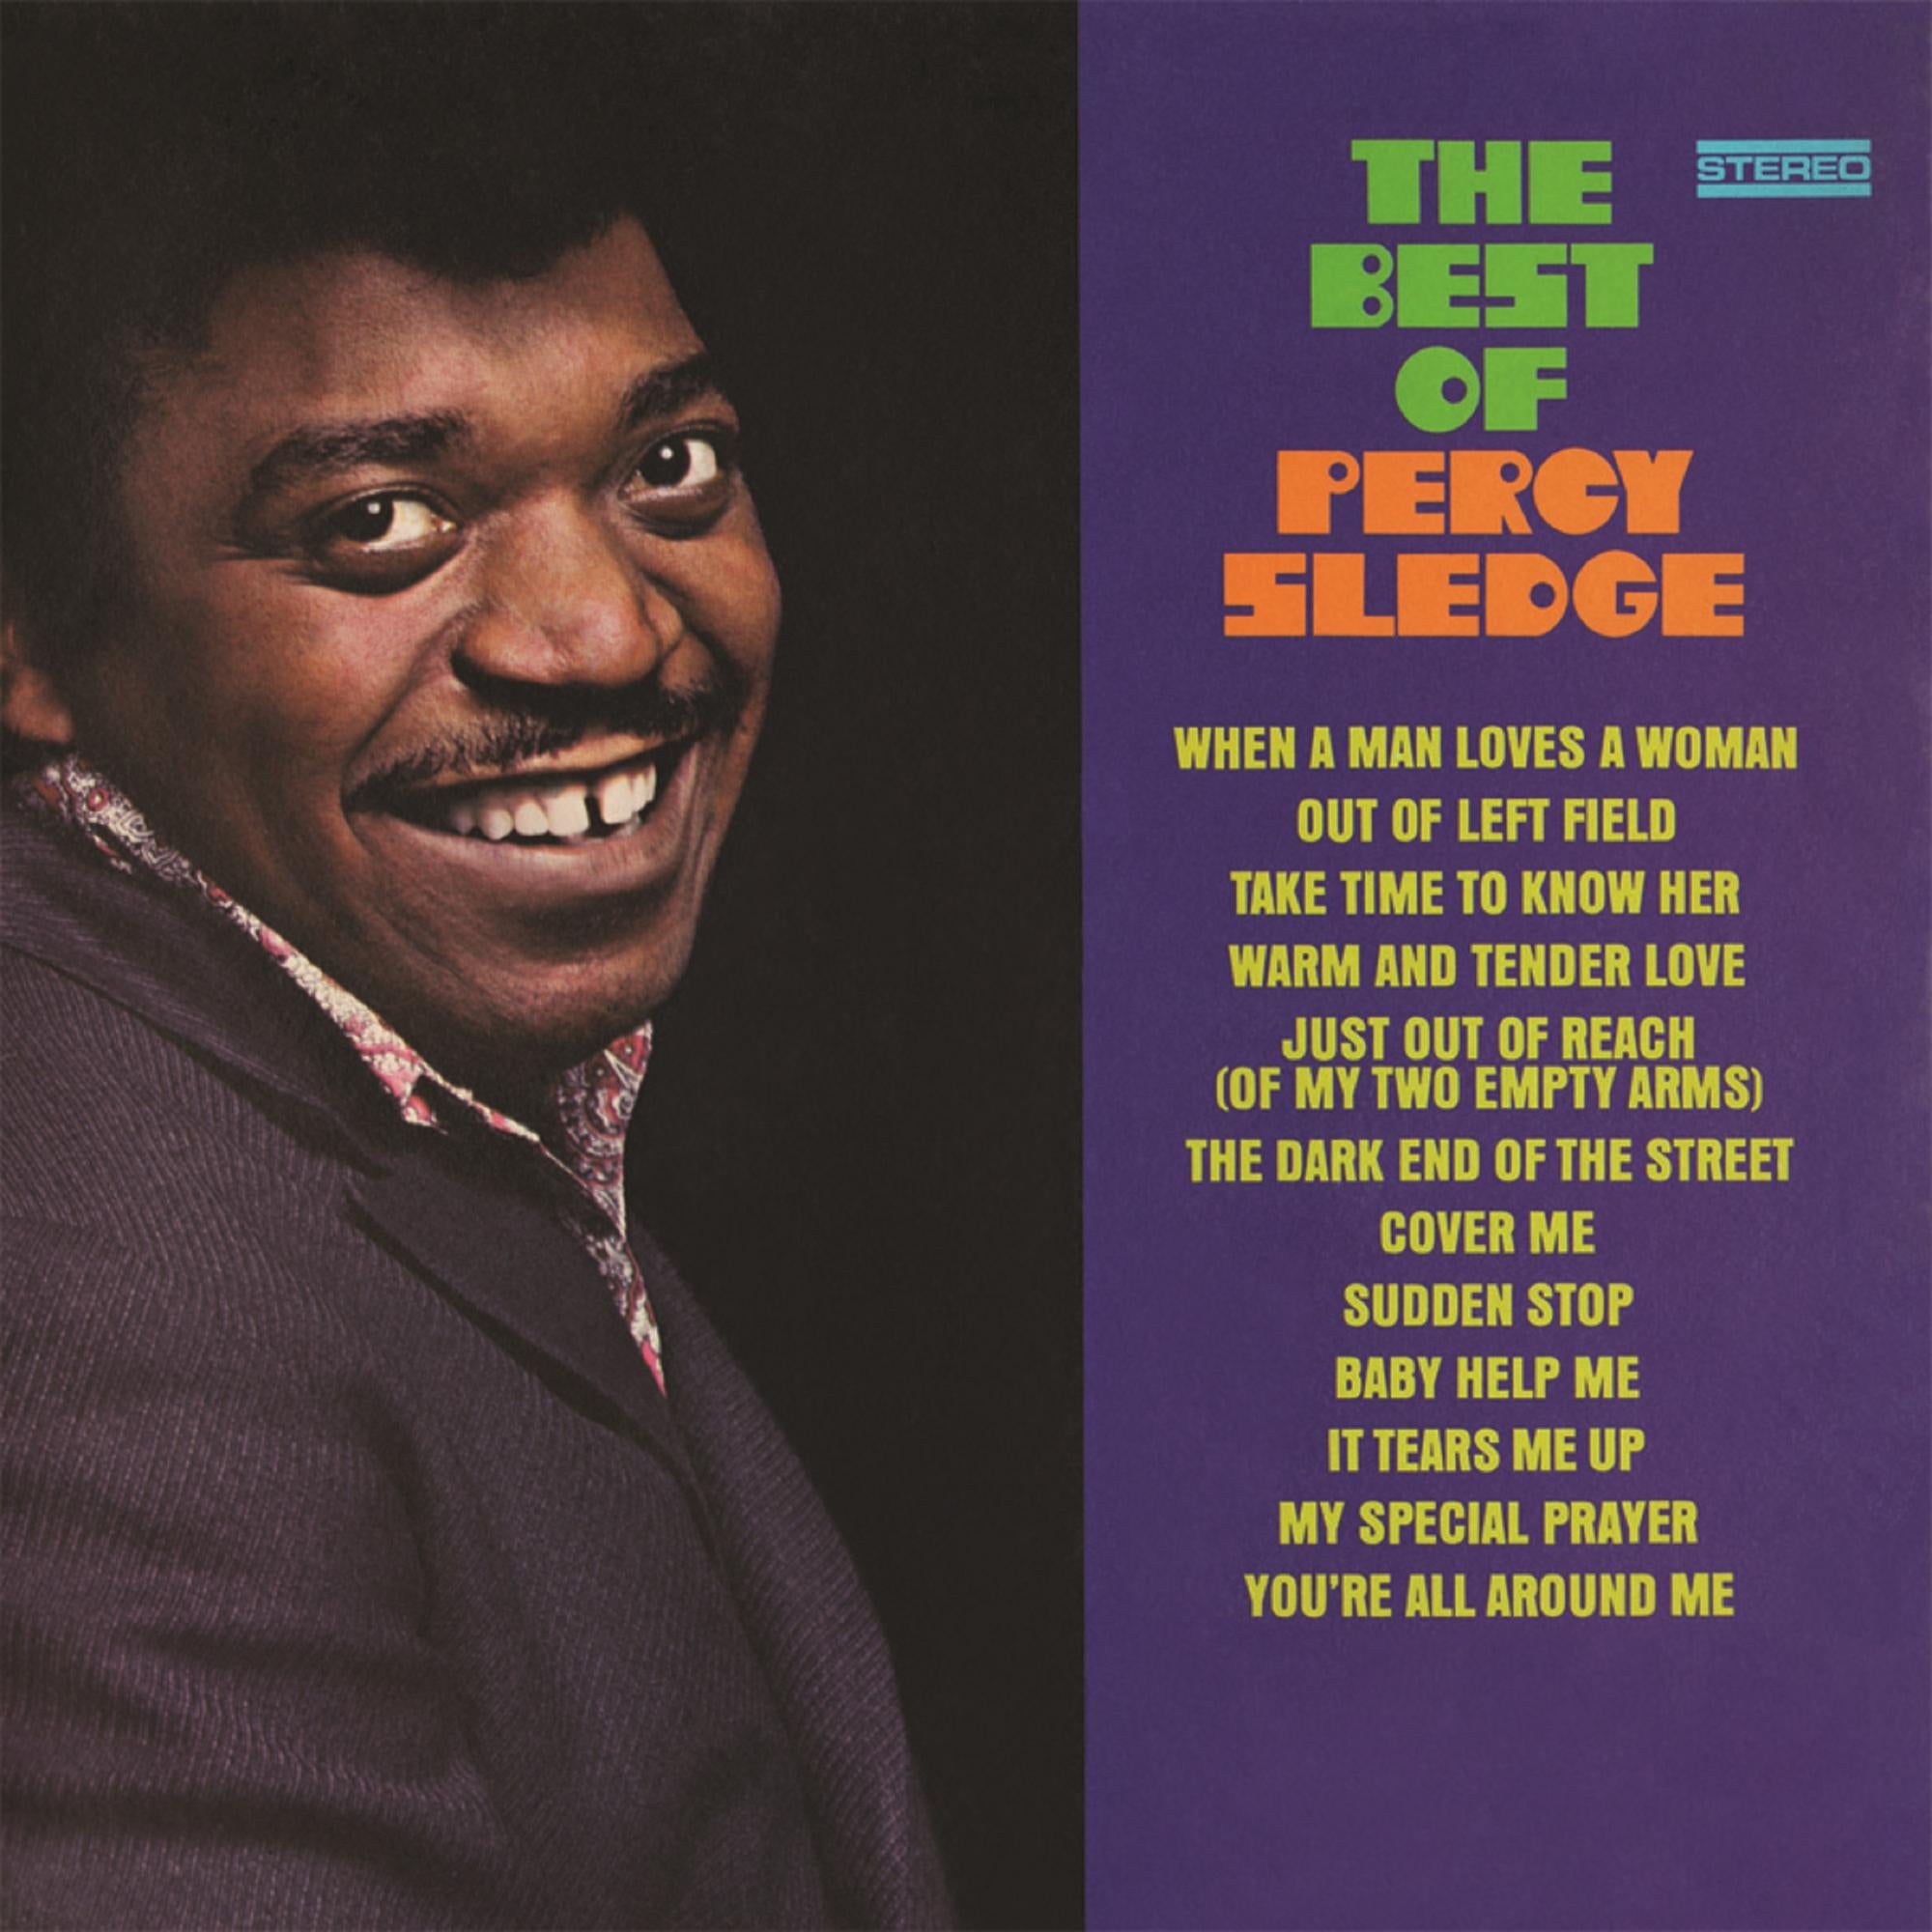 PERCY SLEDGE 'THE BEST OF PERCY SLEDGE' LP (Gold Vinyl)